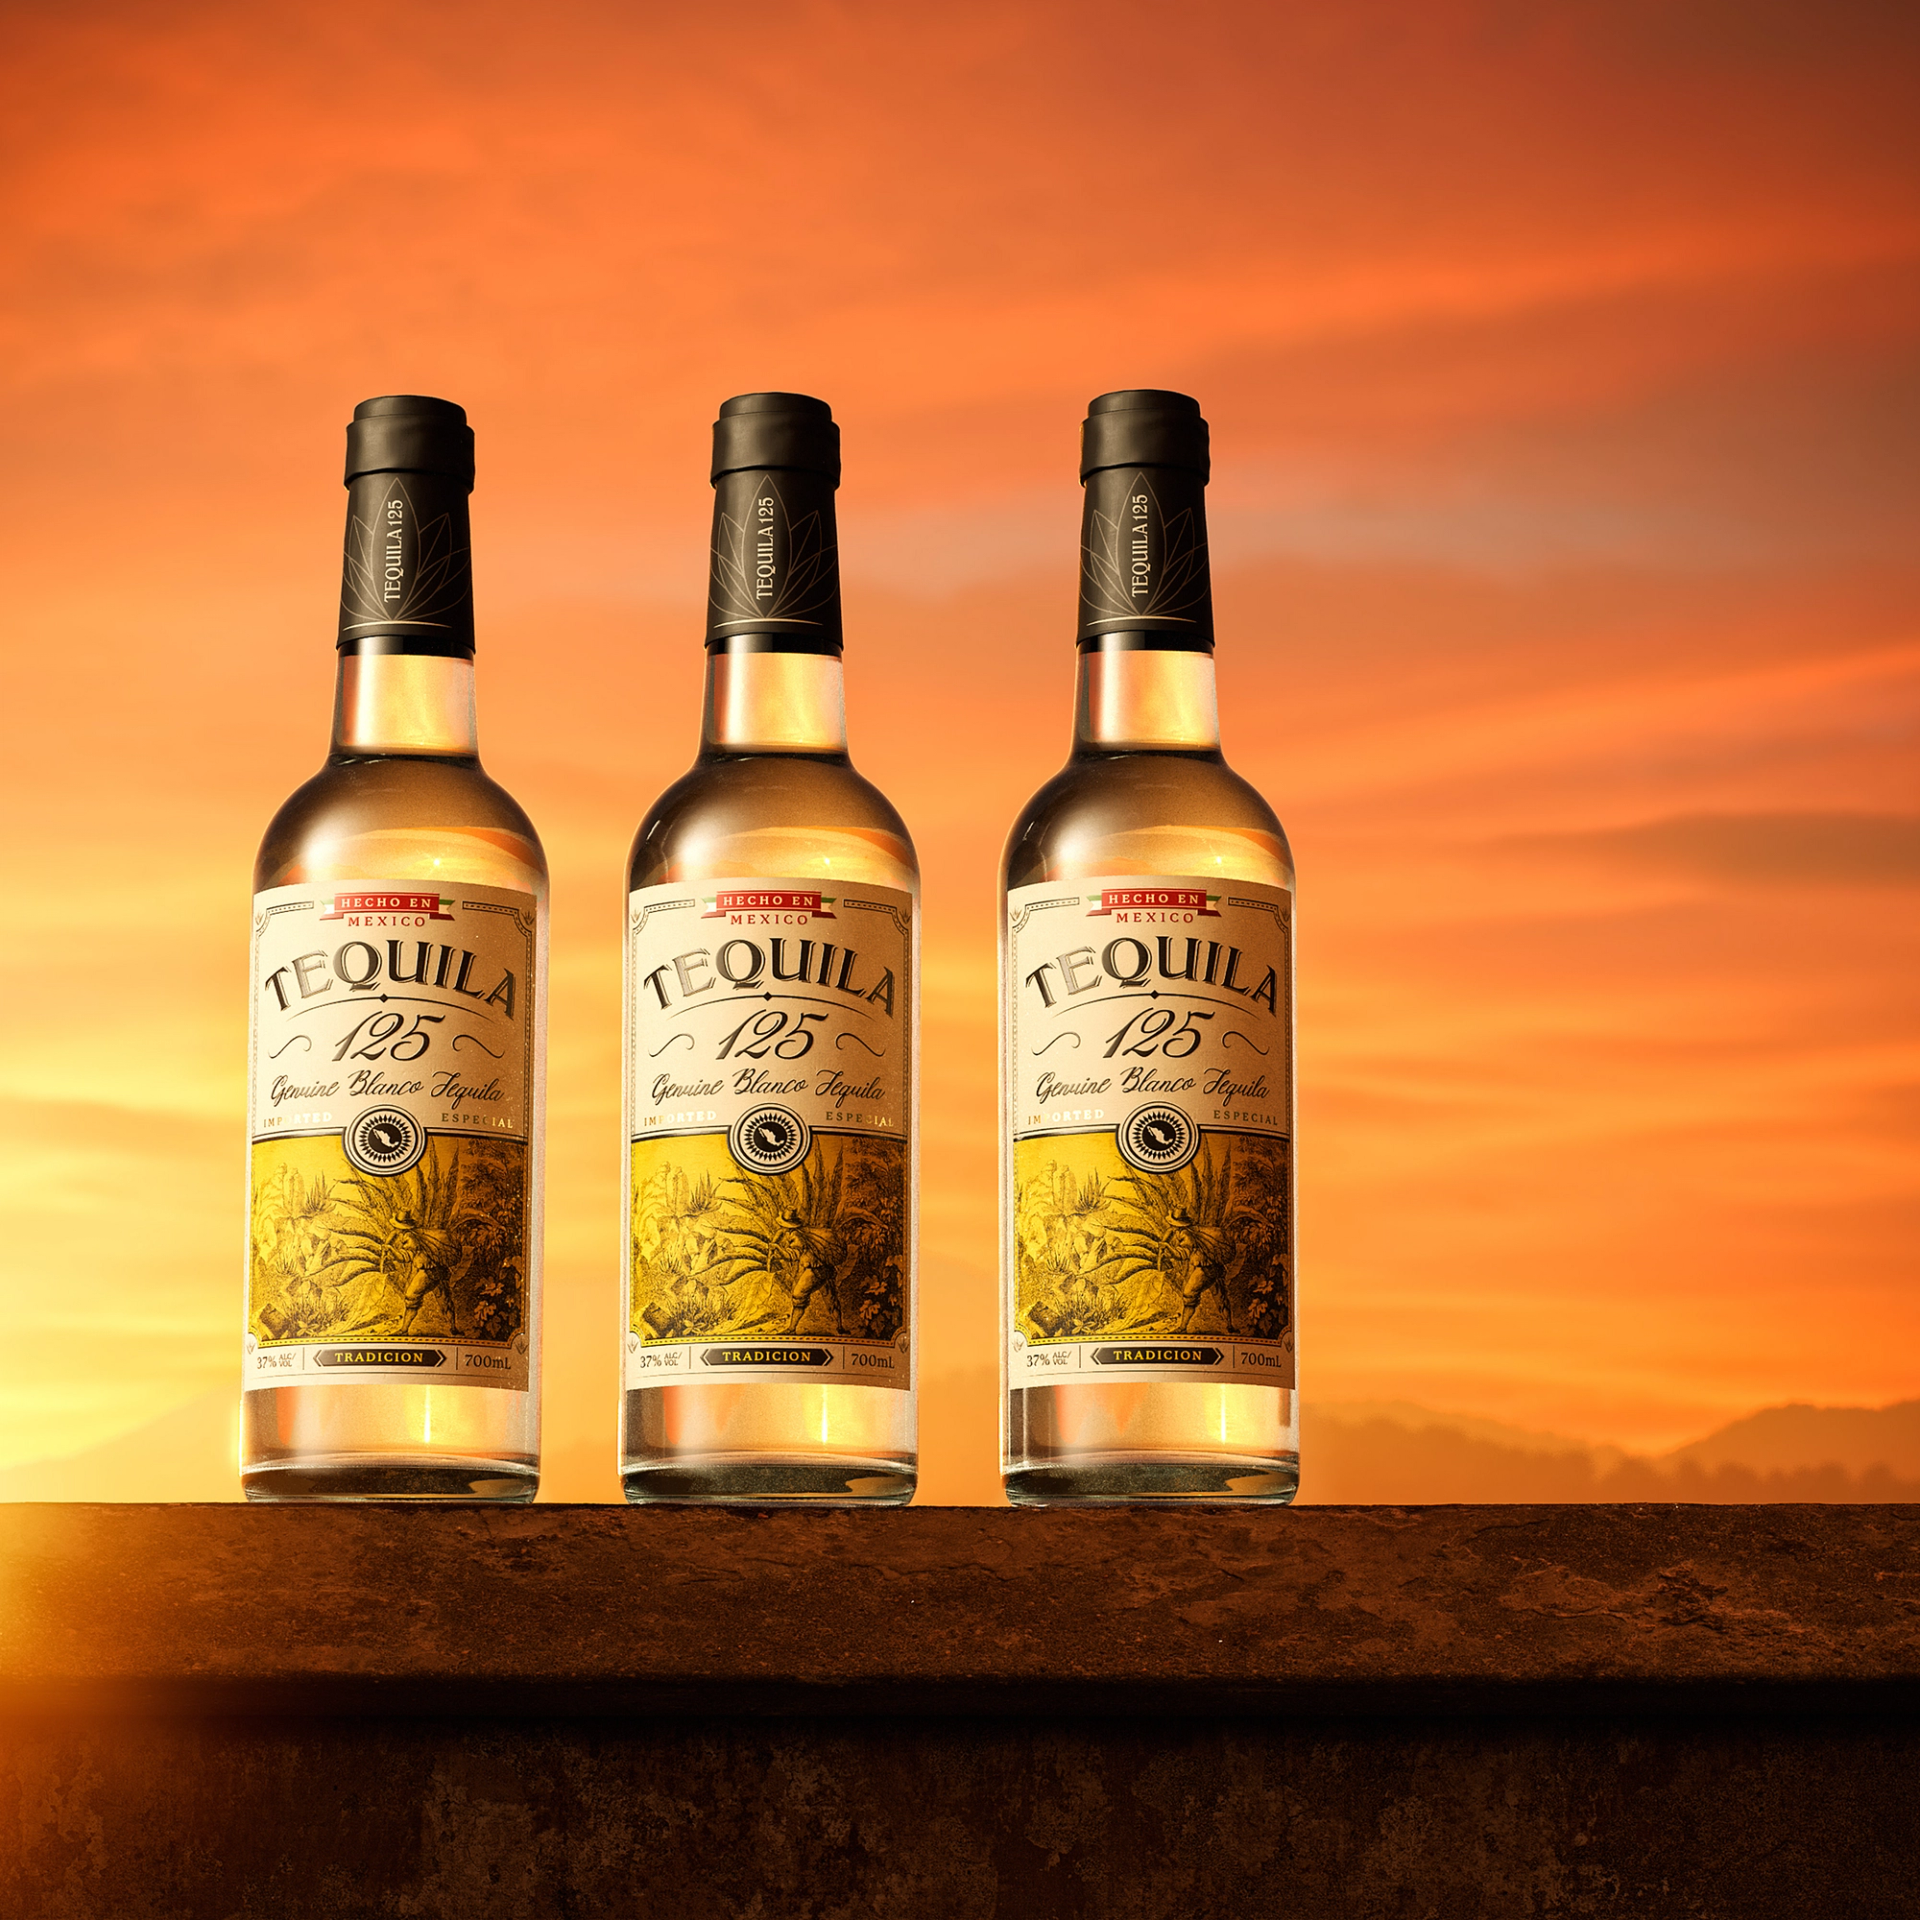 Three bottles of Tequila 125 featuring Sydney packaging design agency Our Revolution, in front of a warm sunset scene